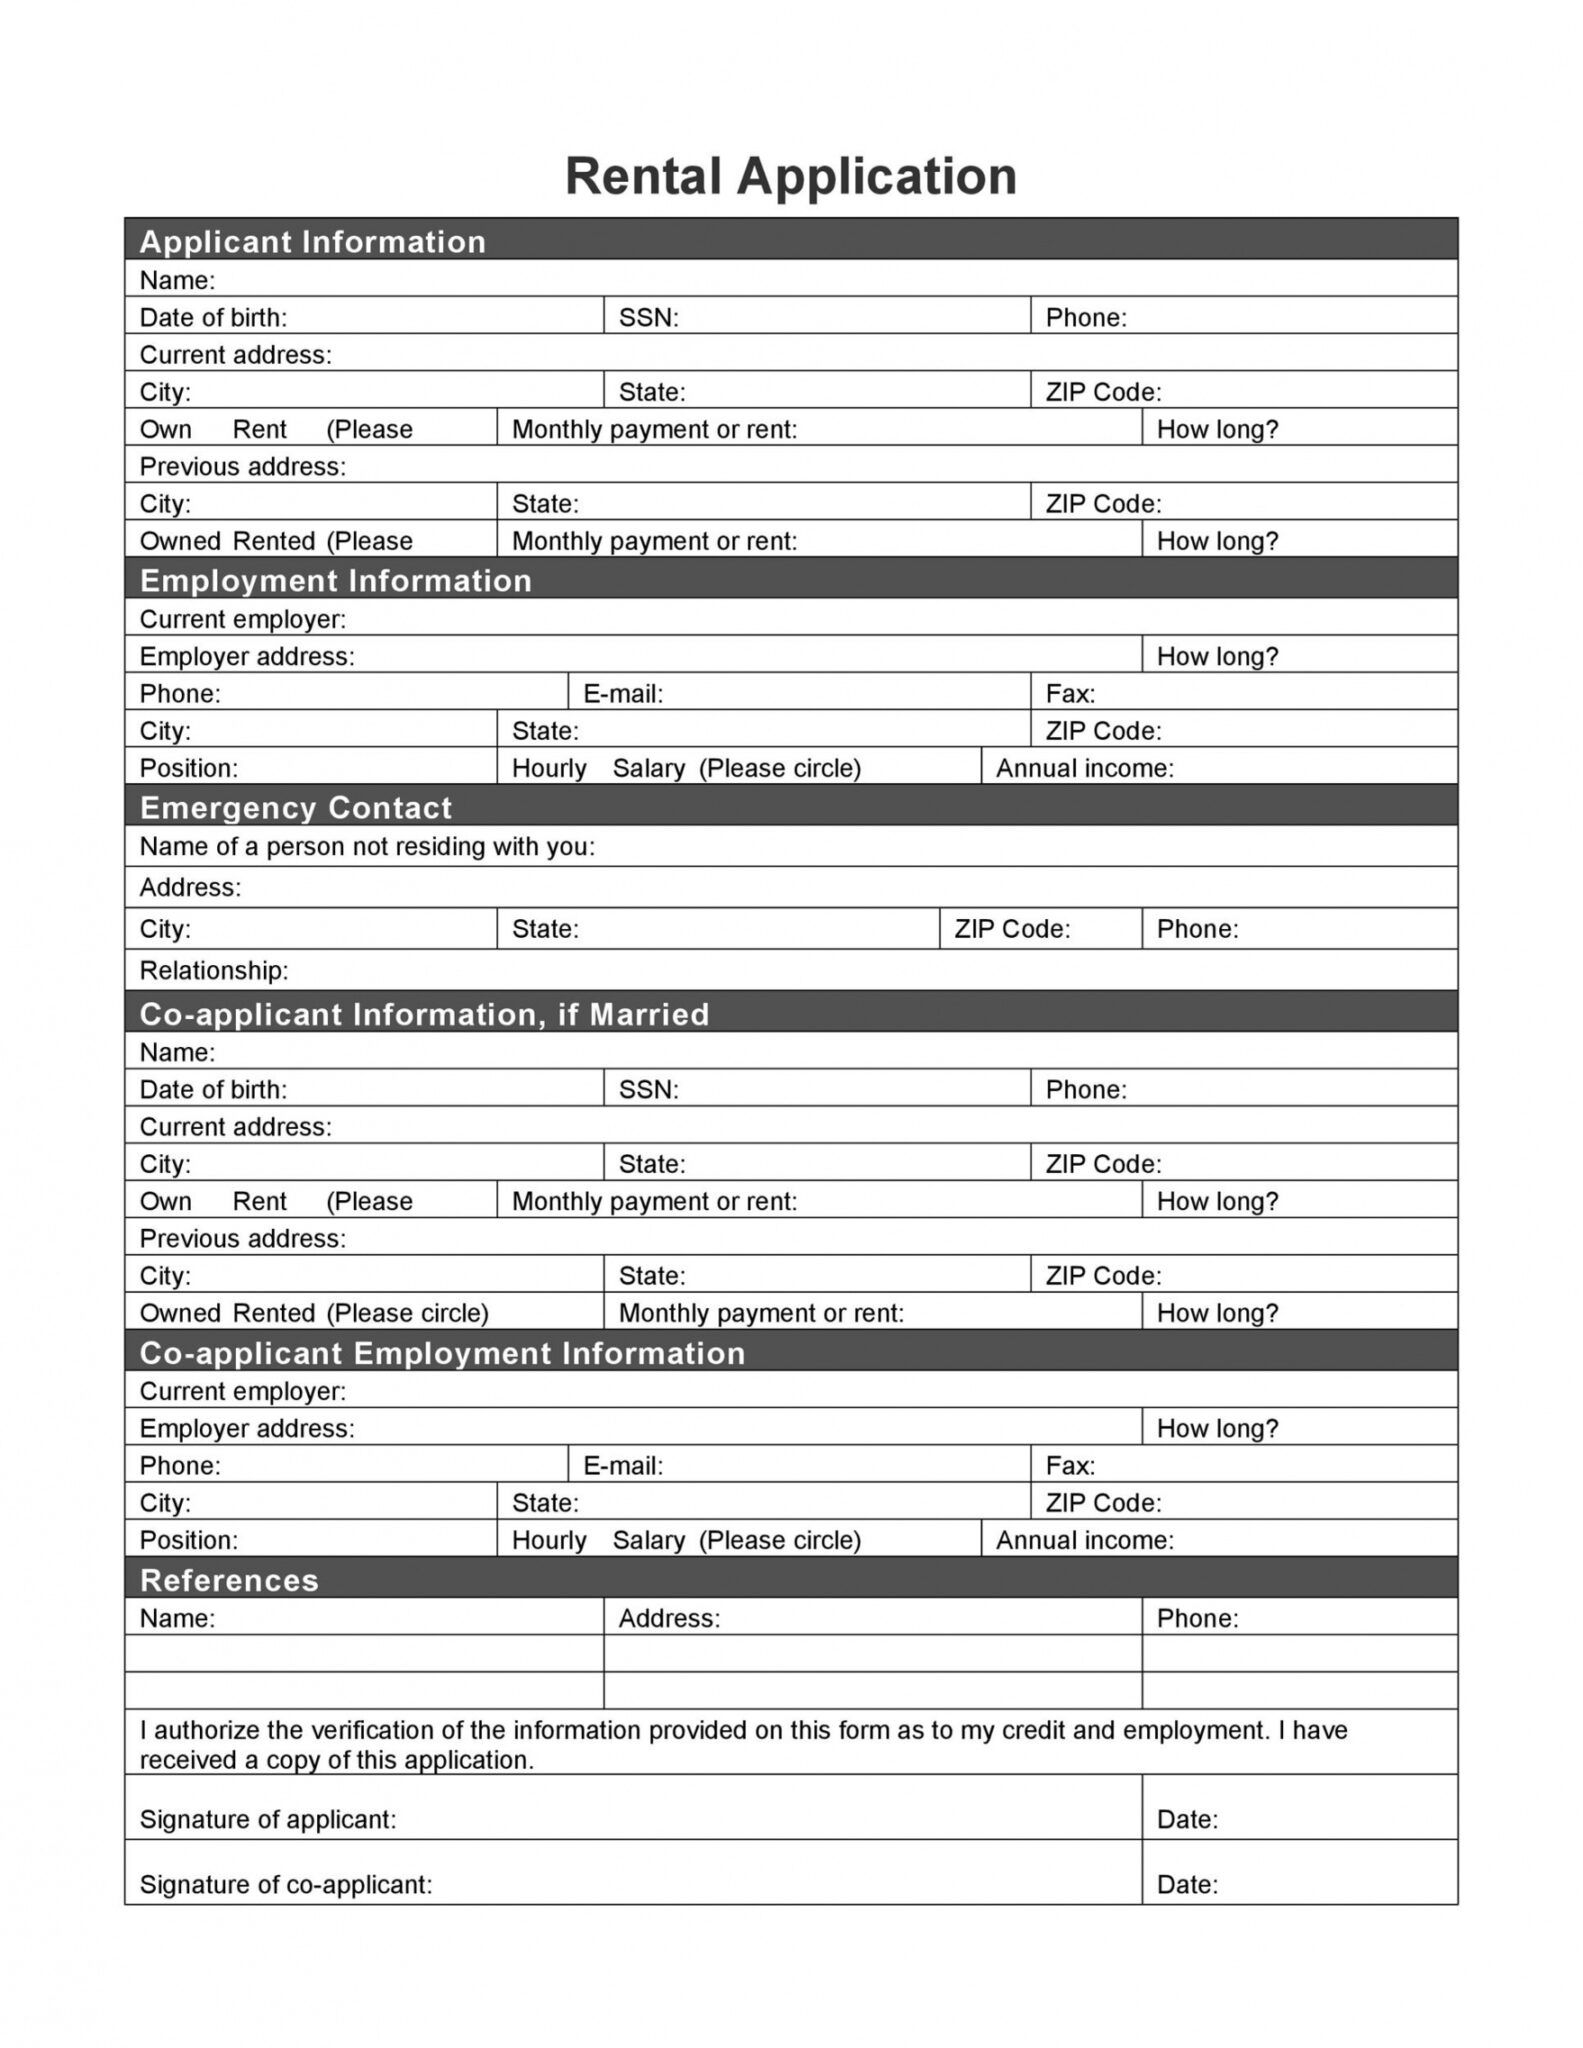 42-simple-rental-application-forms-100-free-templatelab-home-rental-application-form-template